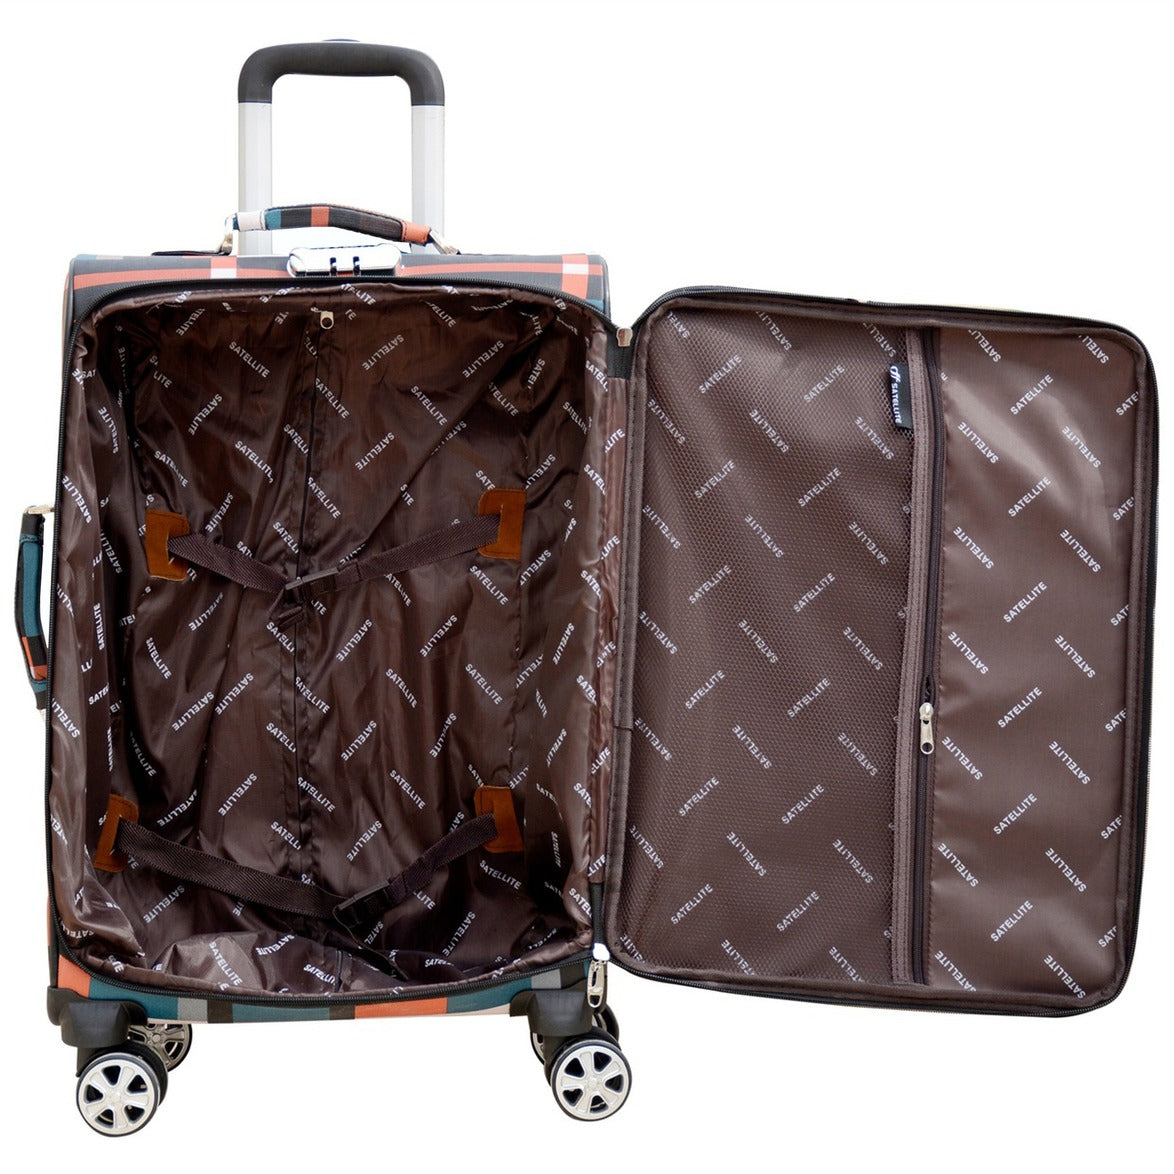 PU Check Lightweight Soft Material Luggage Bag with Double Spinner wheel Zaappy